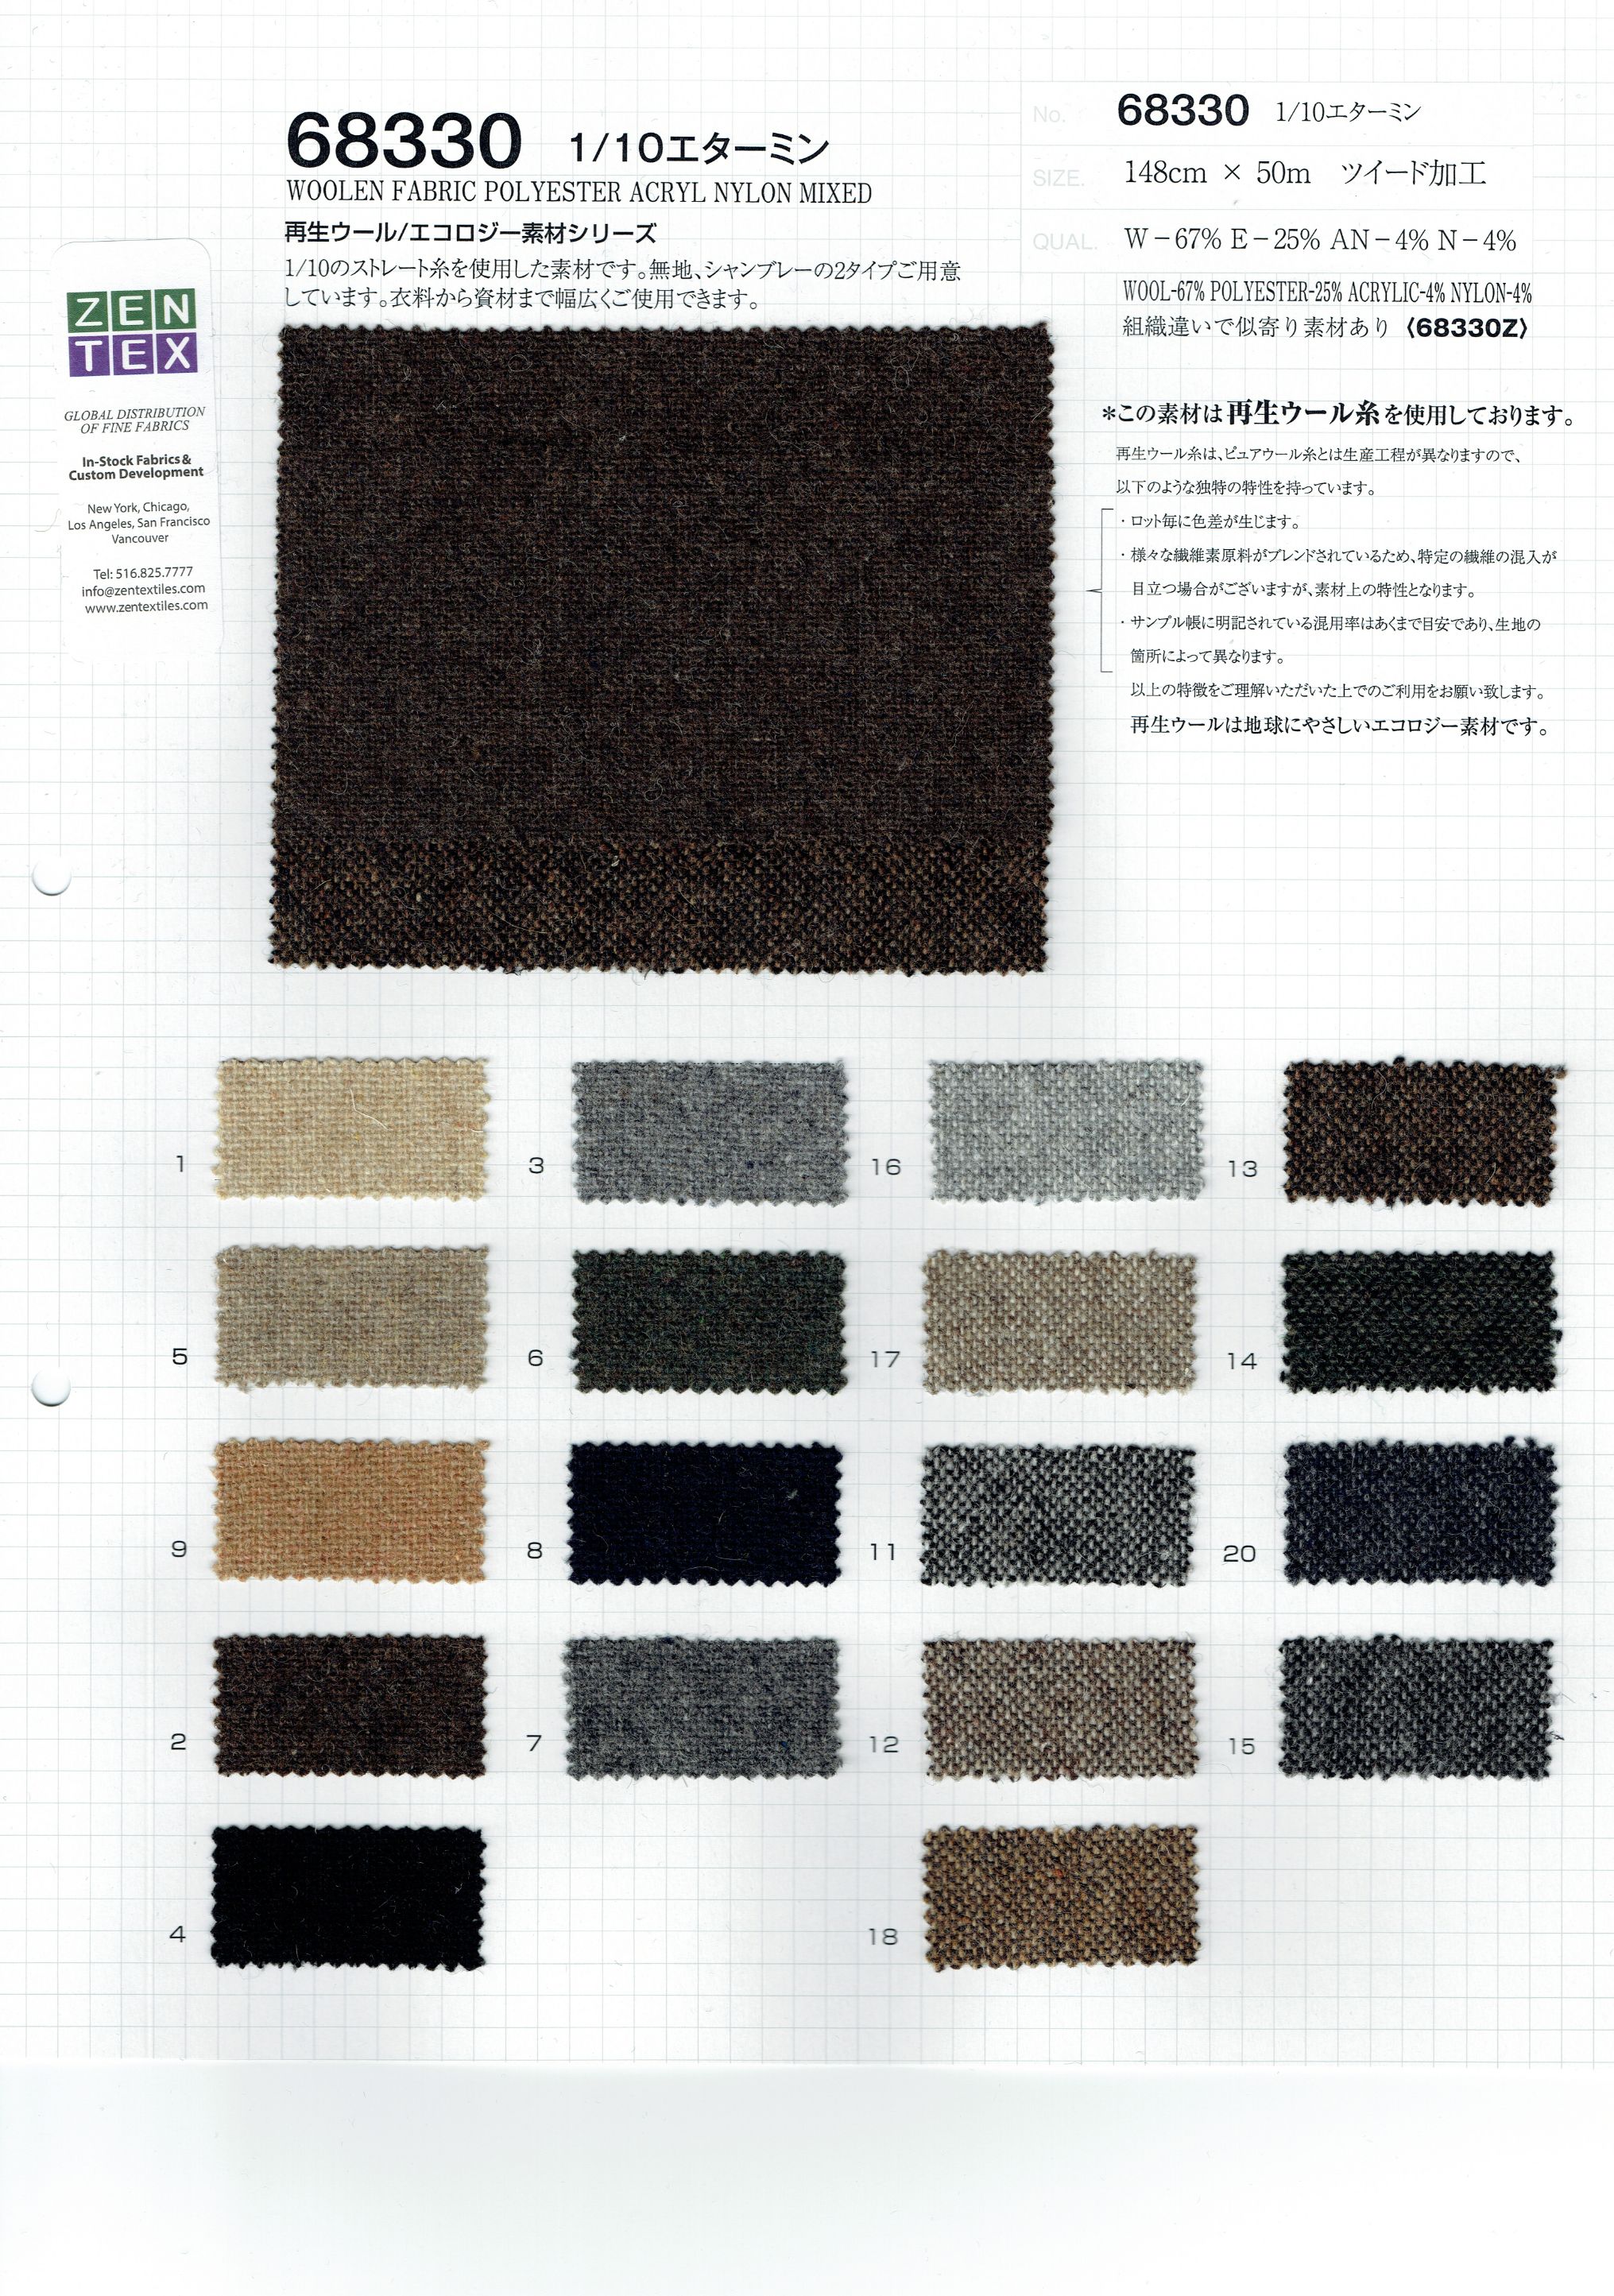 View 67% WOOLEN FABRIC 25% POLYESTER 4% ACRYL 4% NYLON MIXED